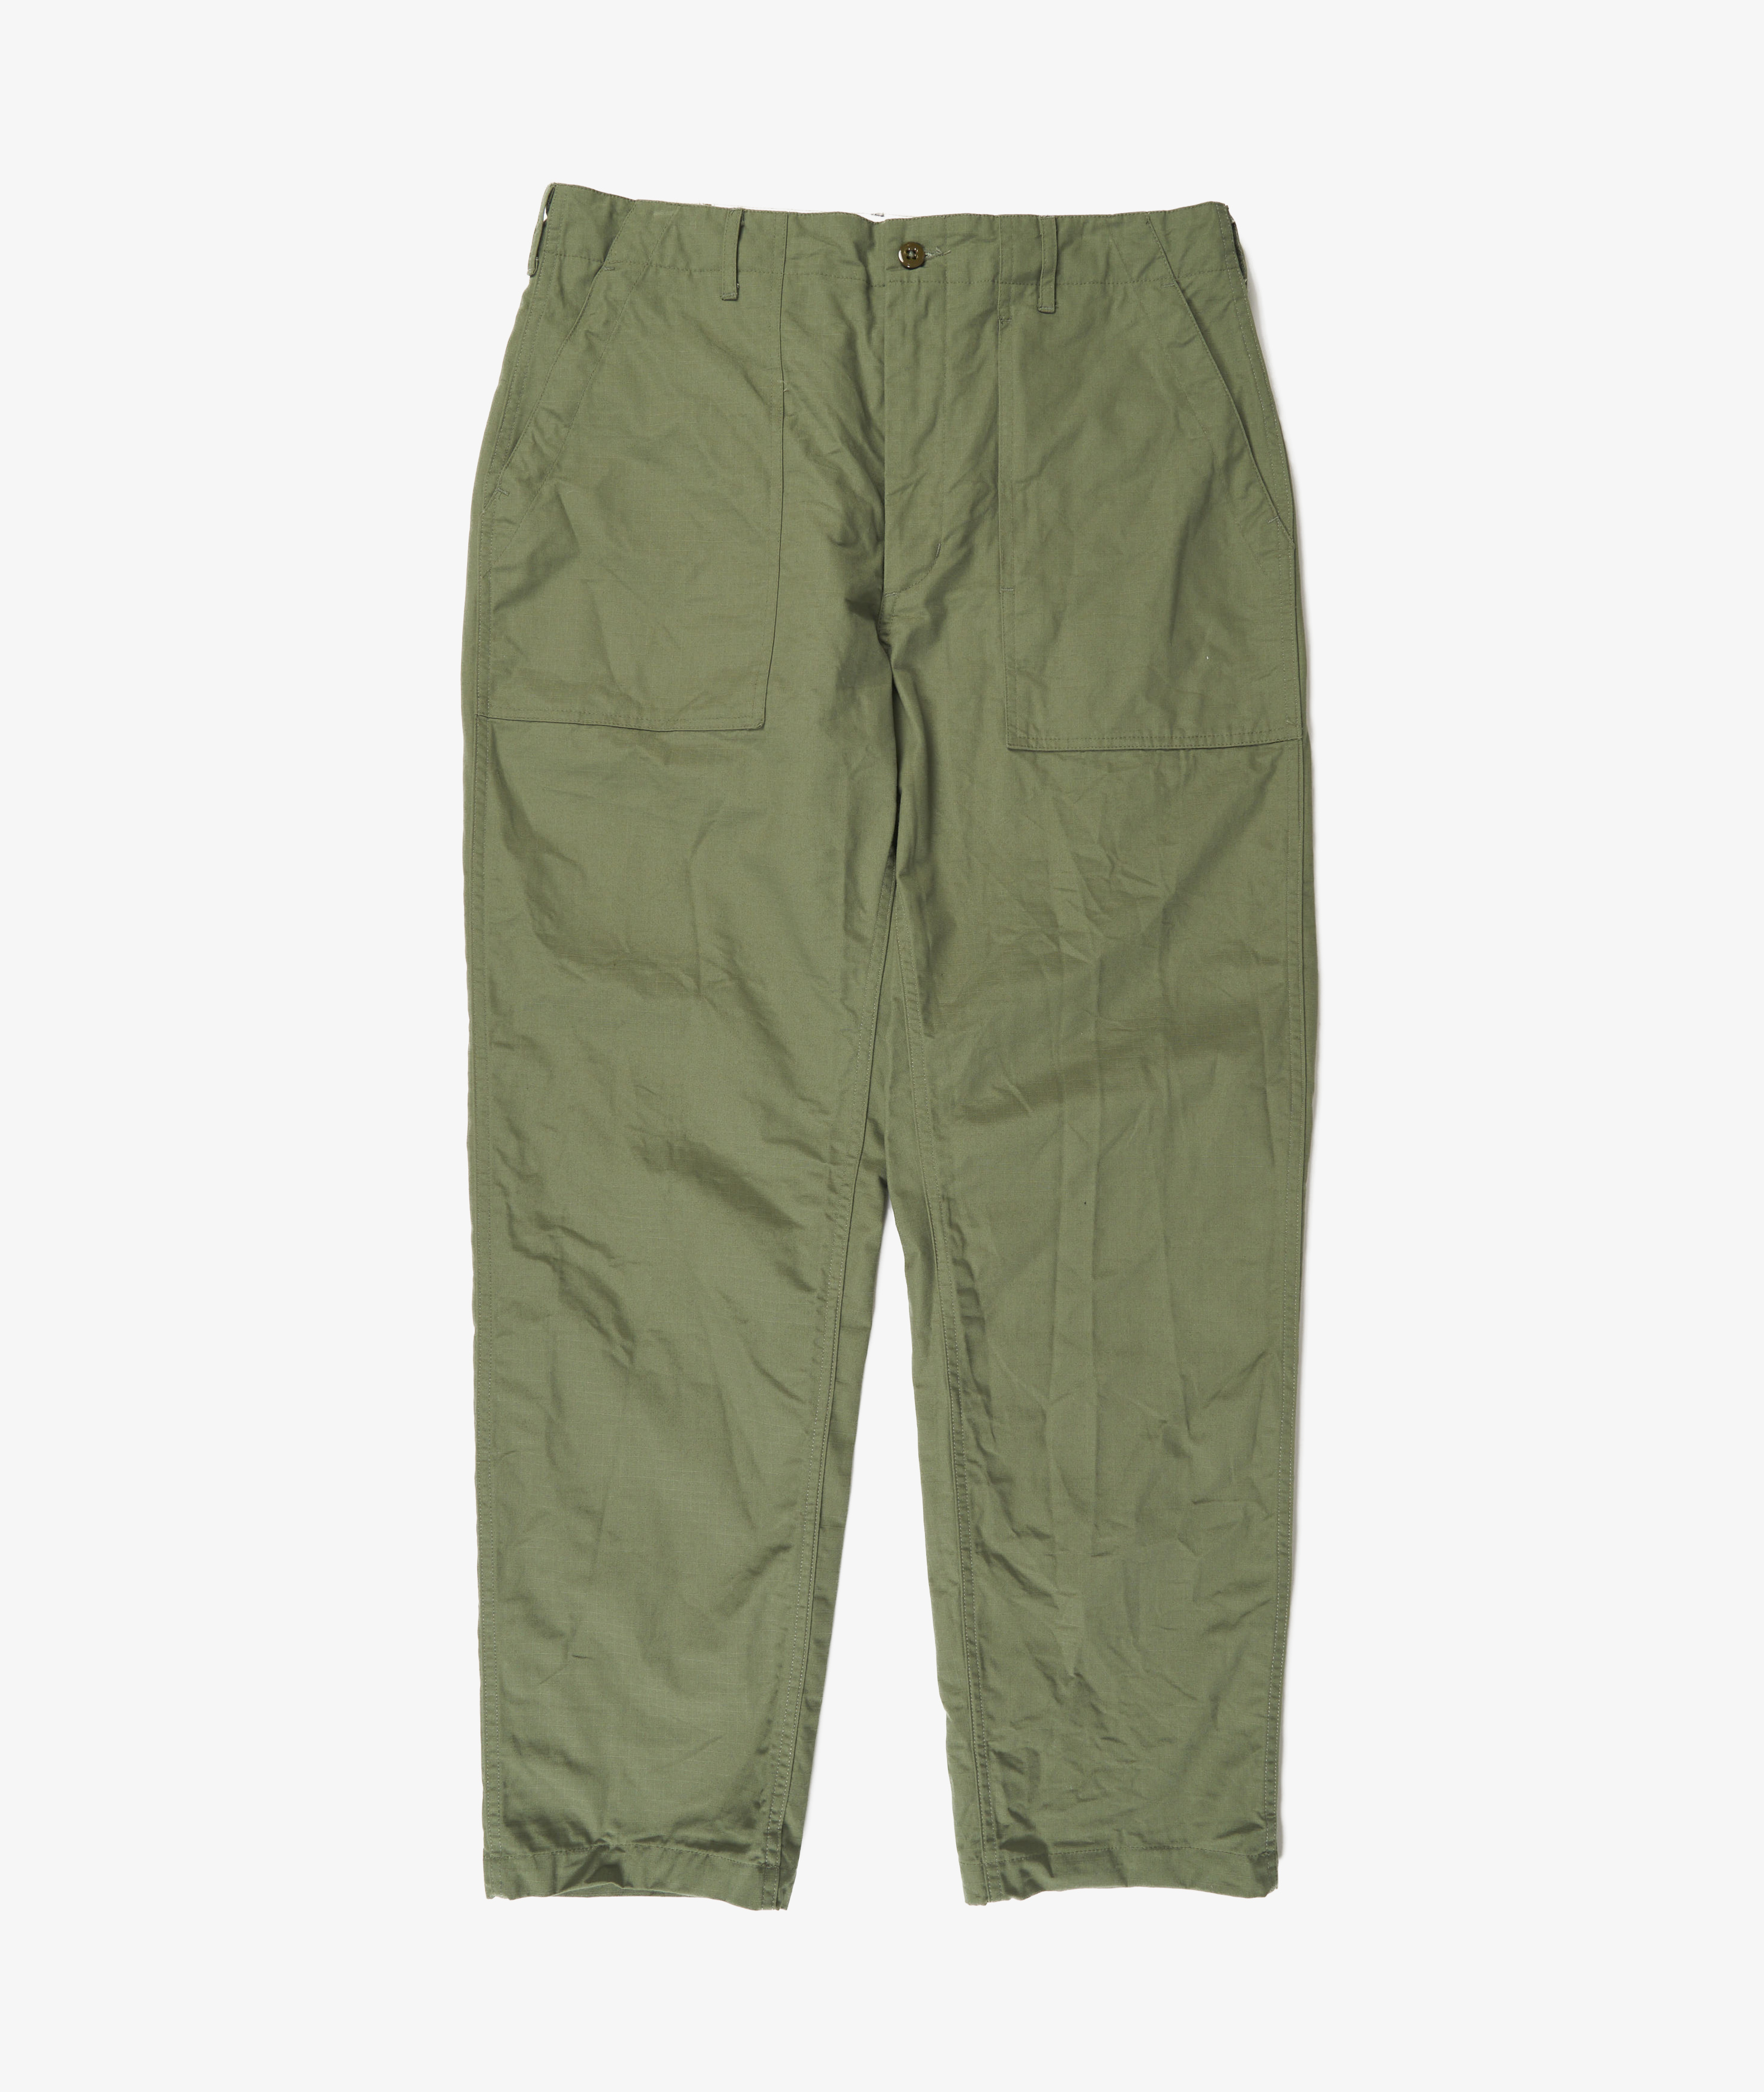 New BDU 2.0 Work Pants with Updated Features